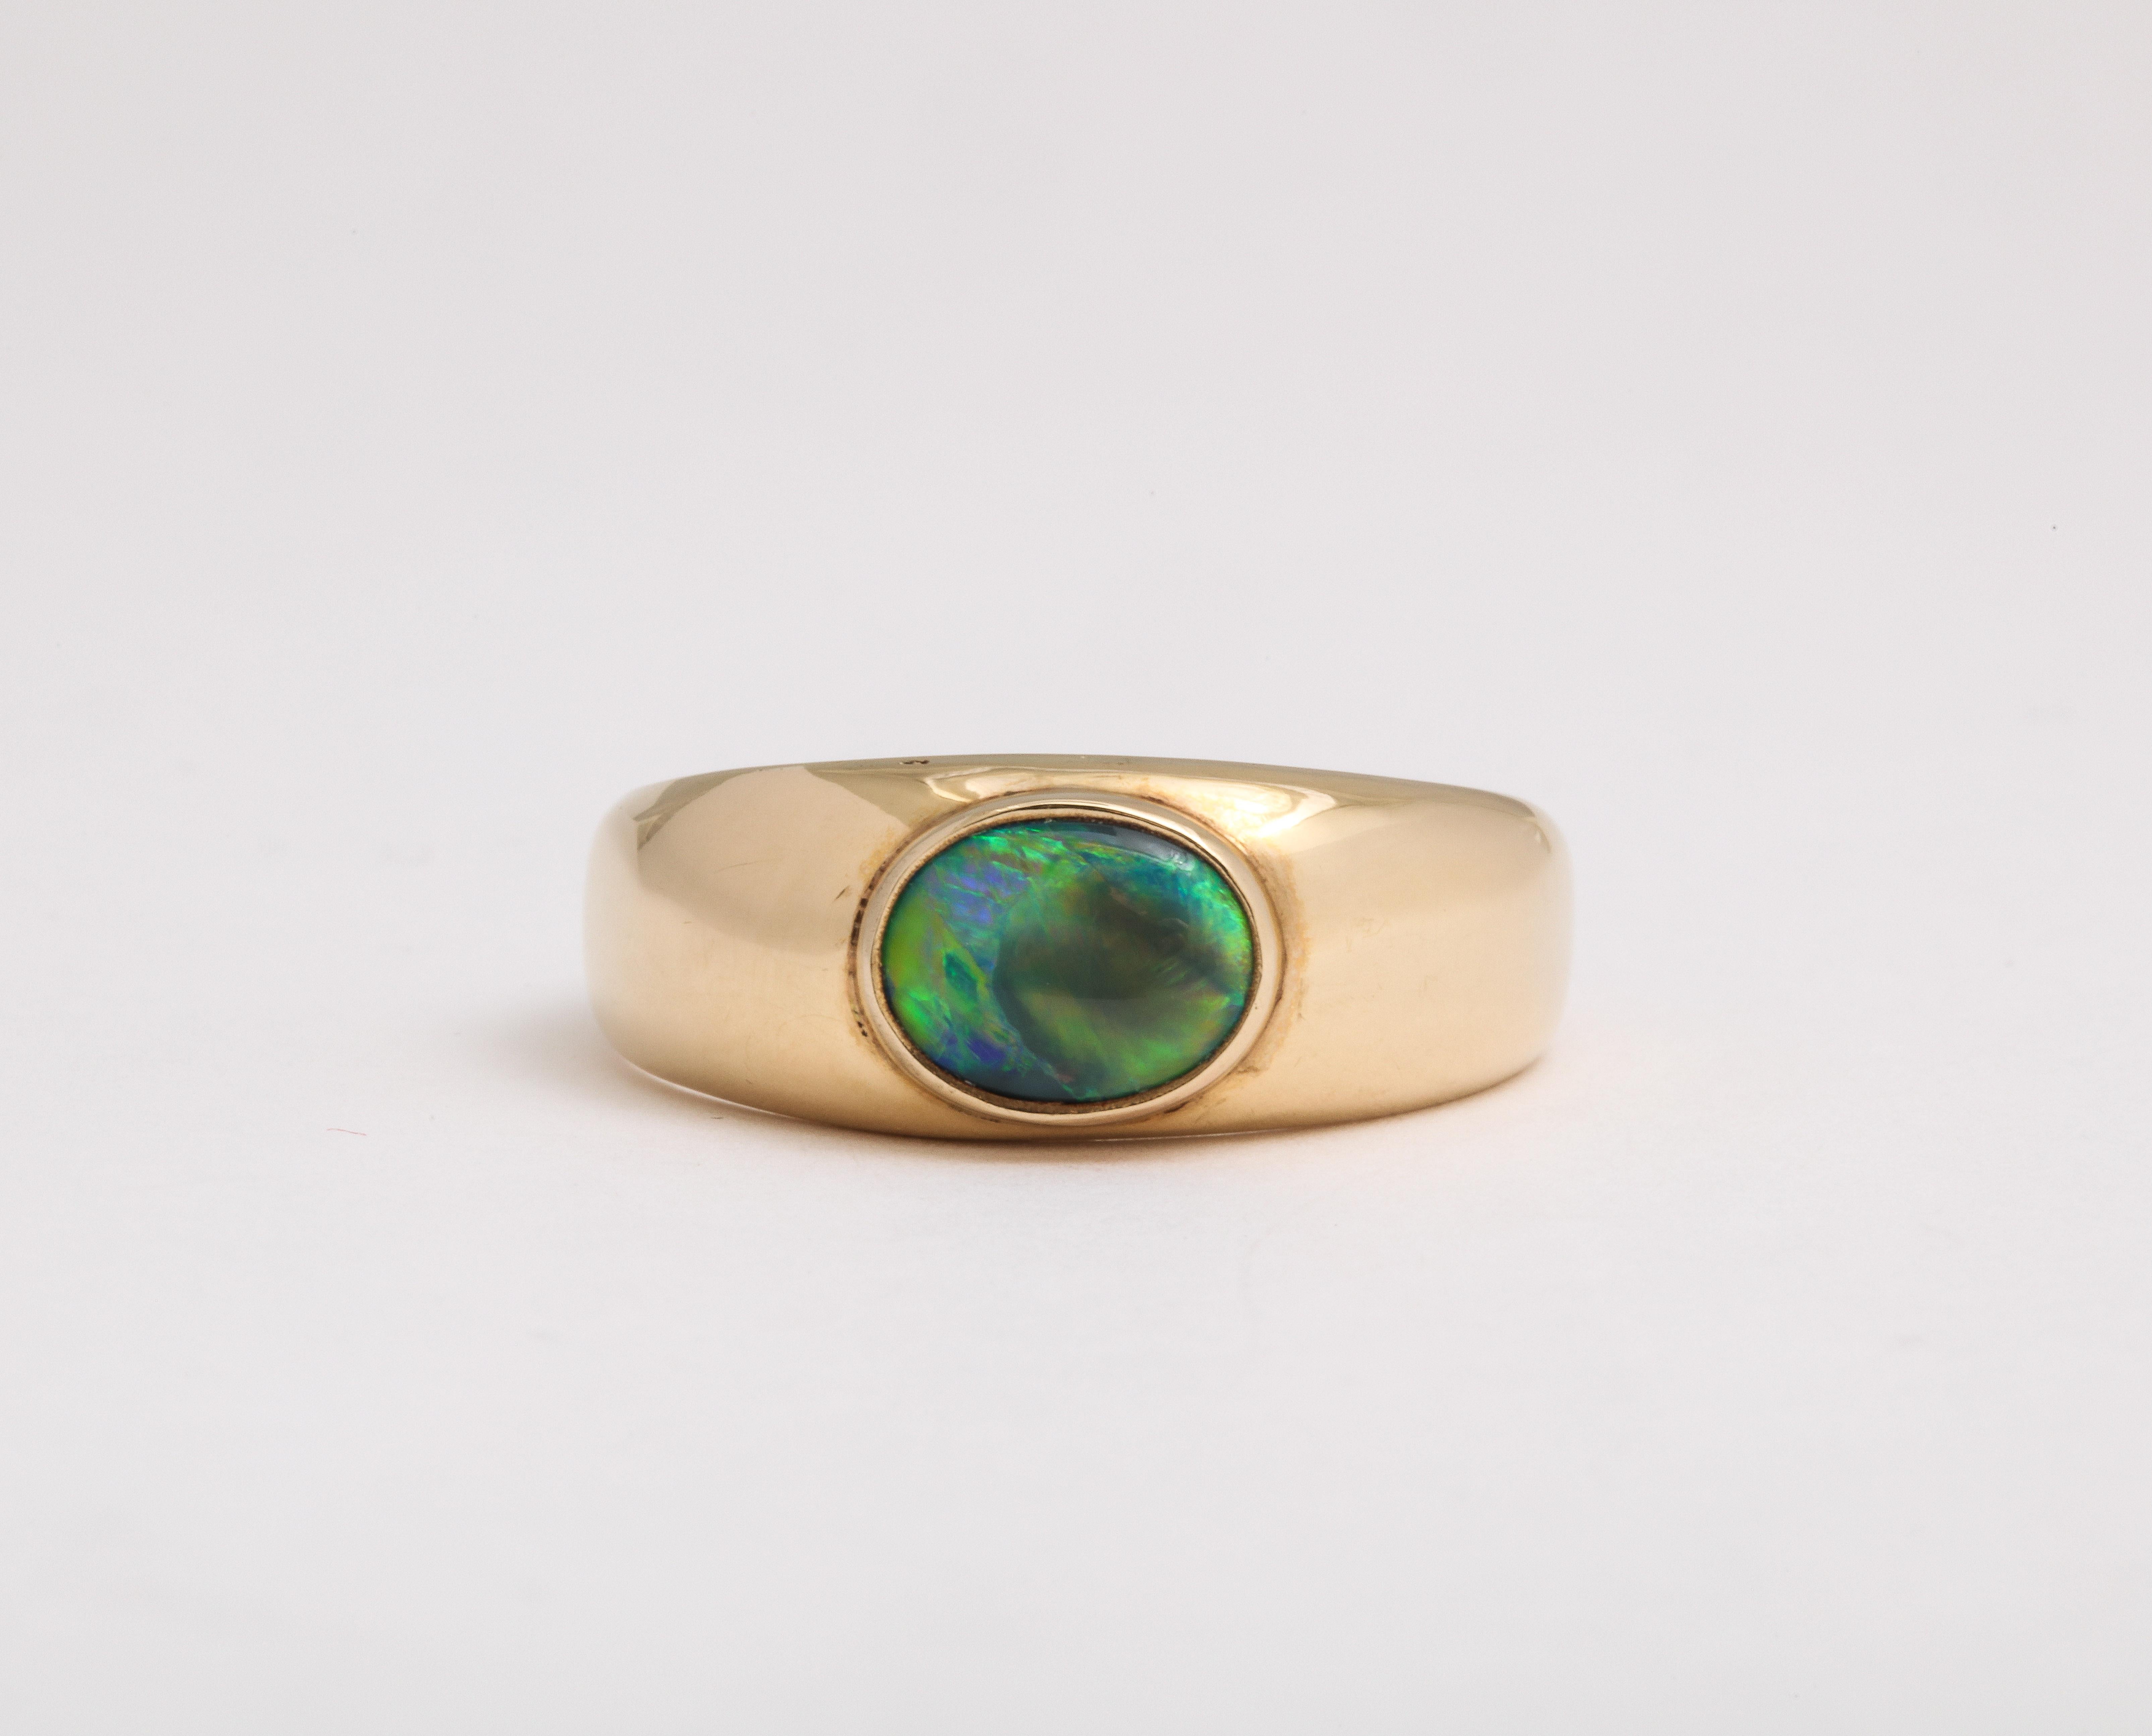 Set with a natural oval black opal of warm ocean blue green  color this ring is nature showing its most rare of the opal family.   There is a spectrum of color in this Australian opal,  a dark tone with flashings within of dark and light shades of